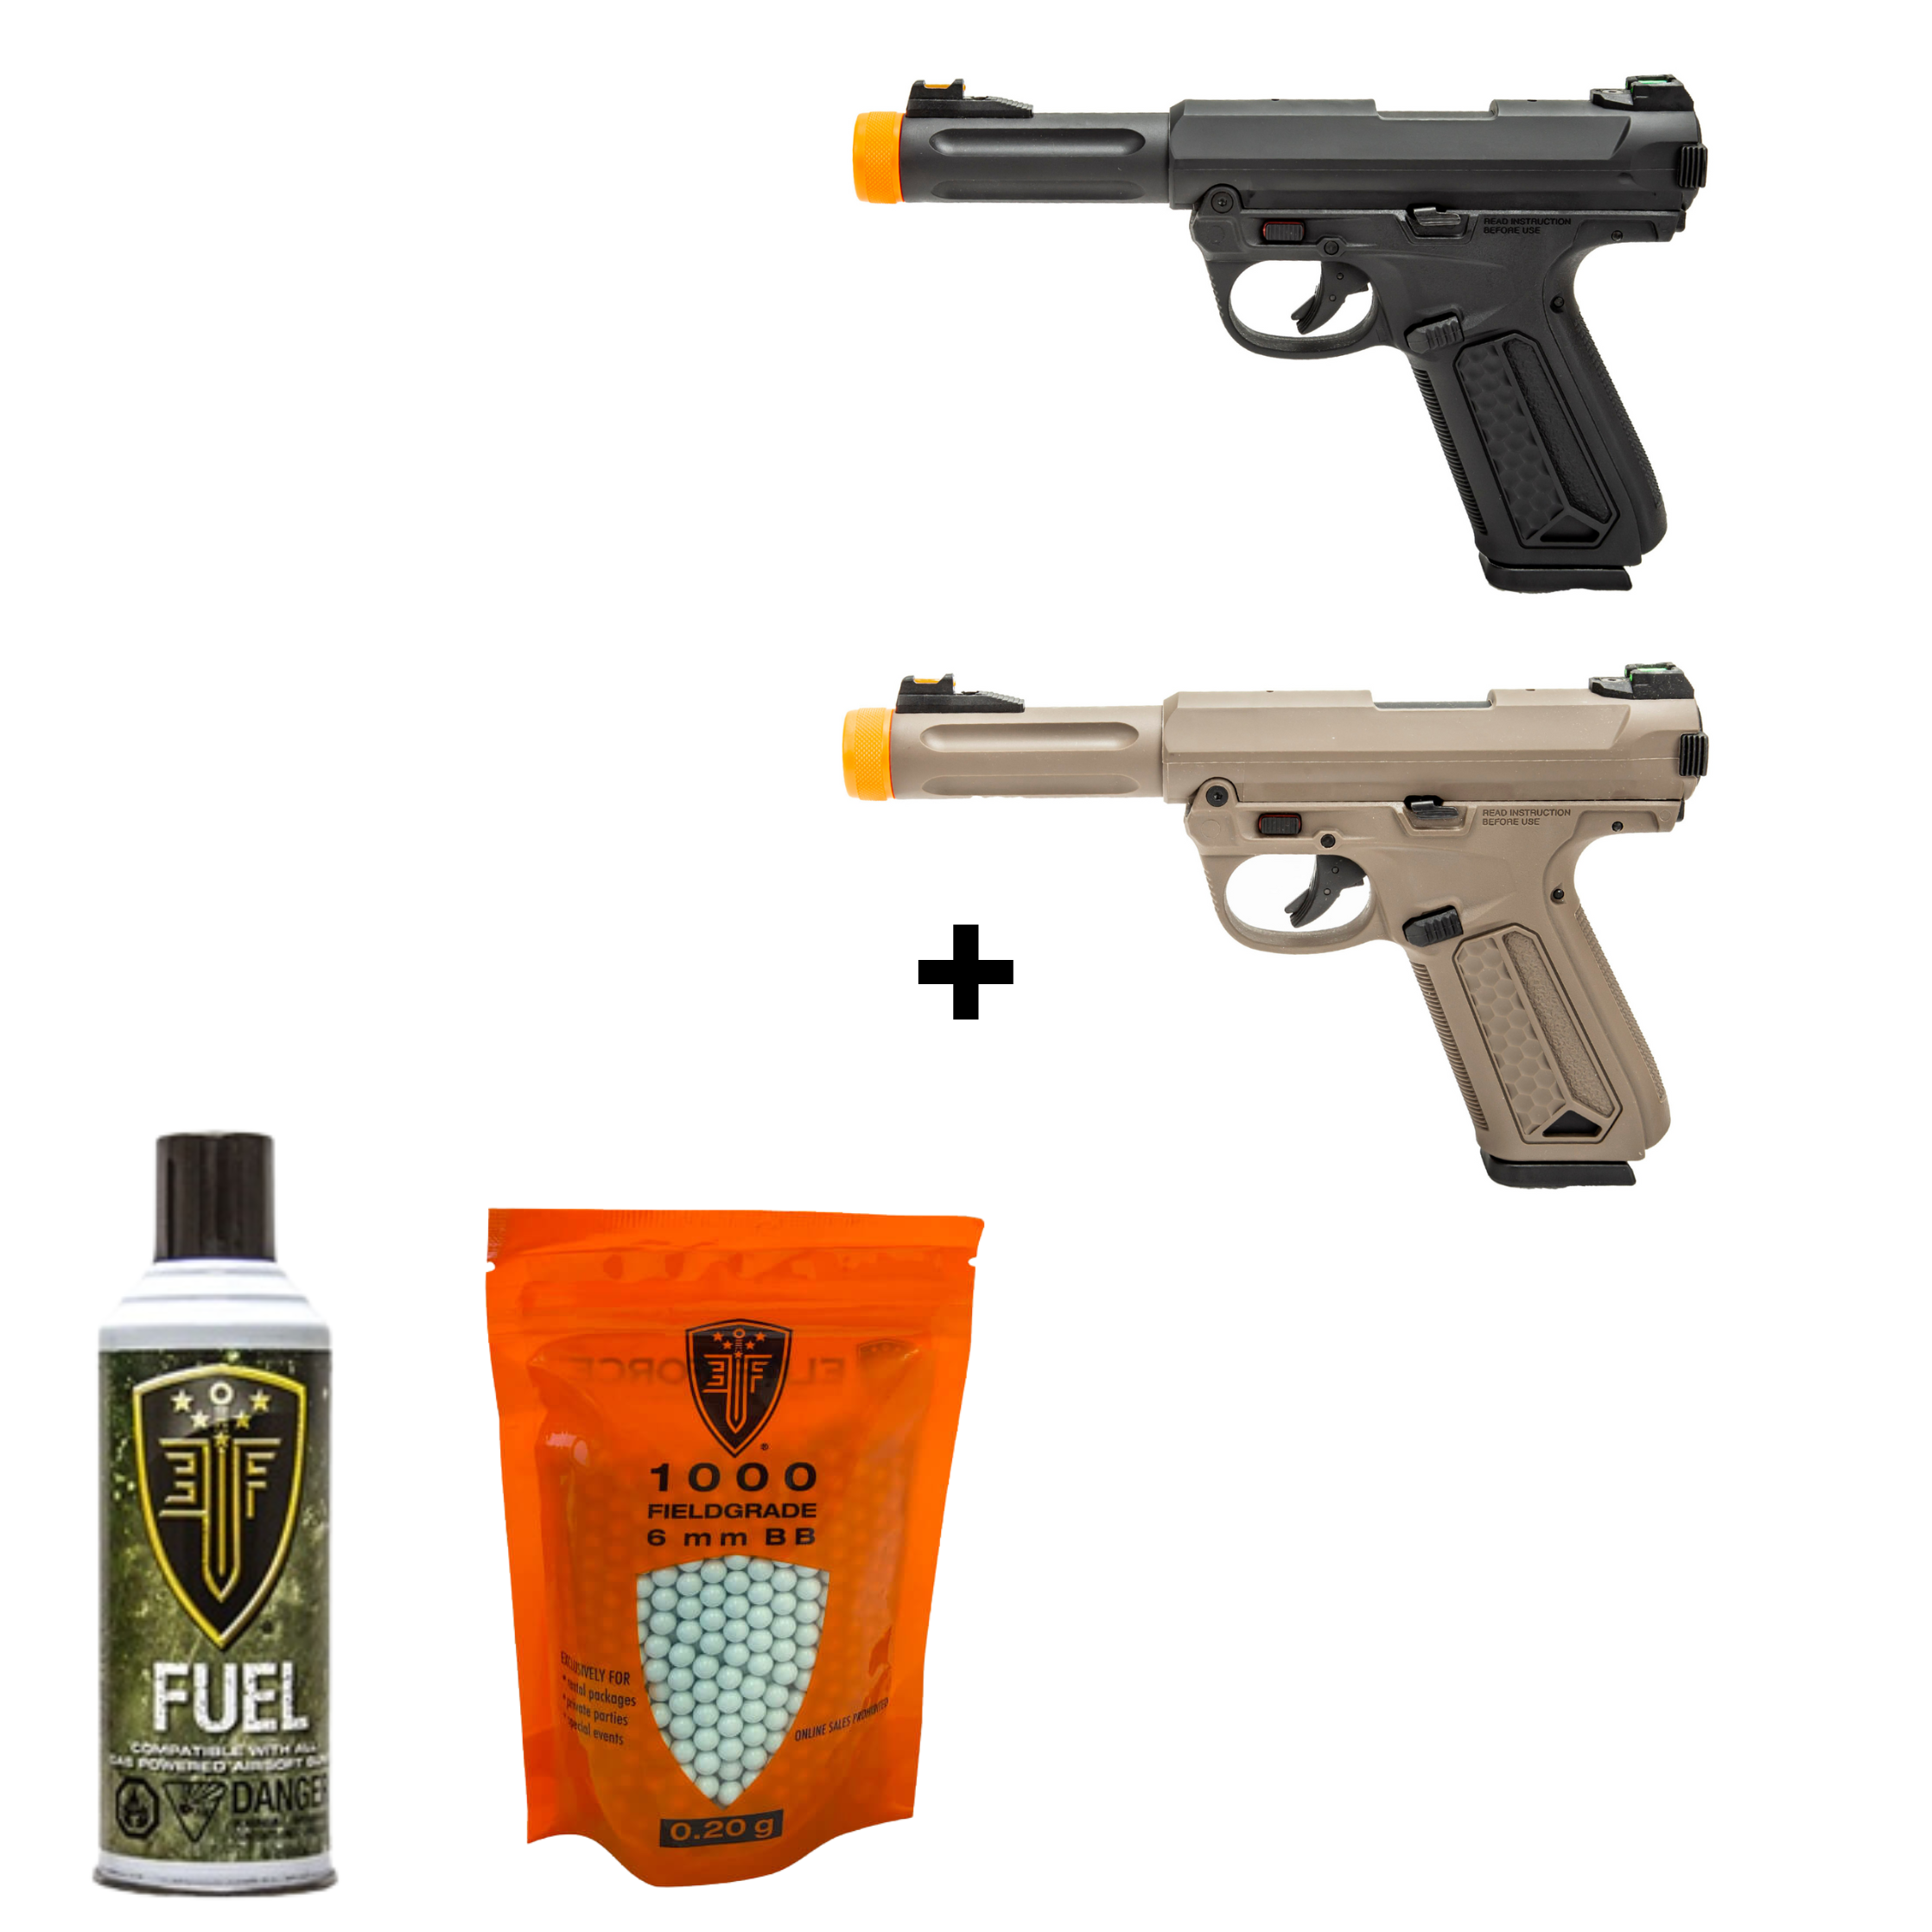 Black Friday Special | Action Army AAP-01 Gas Blowback Pistol + Free Gas & BB's - ssairsoft.com